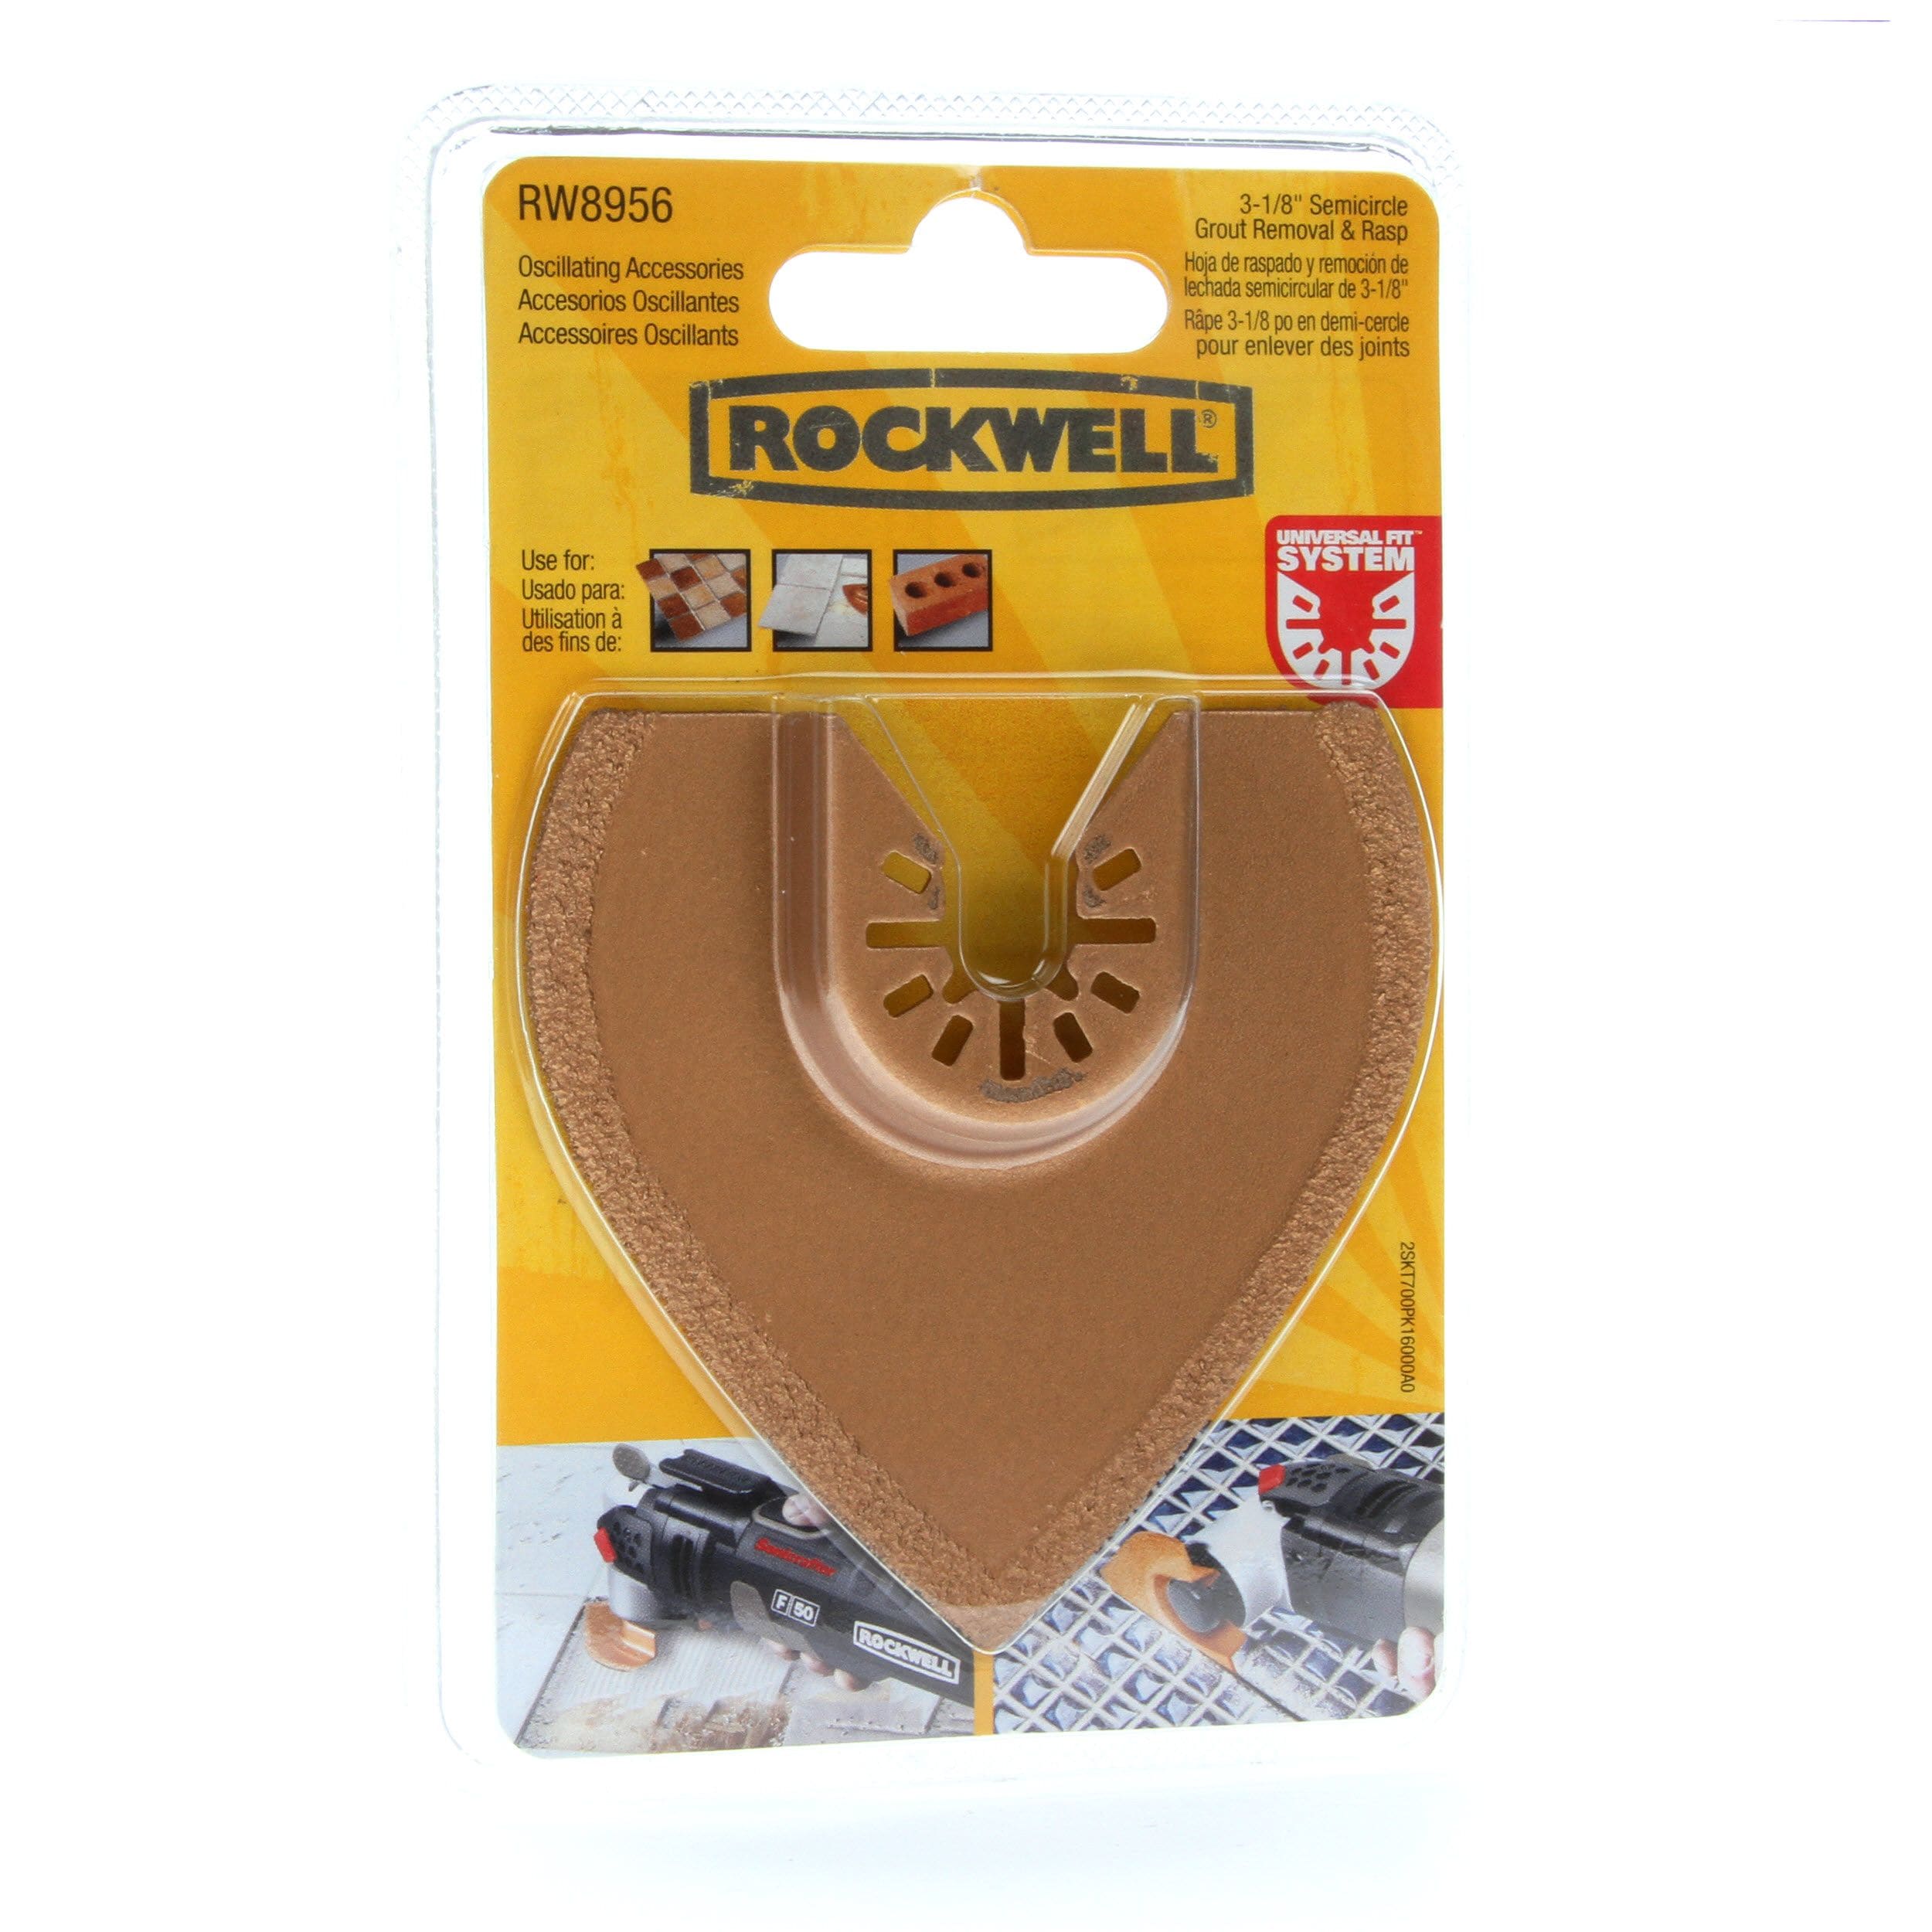 3pk 2-1/2" Segmented Recessed Grout Carbide Rasp Fein Rockwell Oscillating 